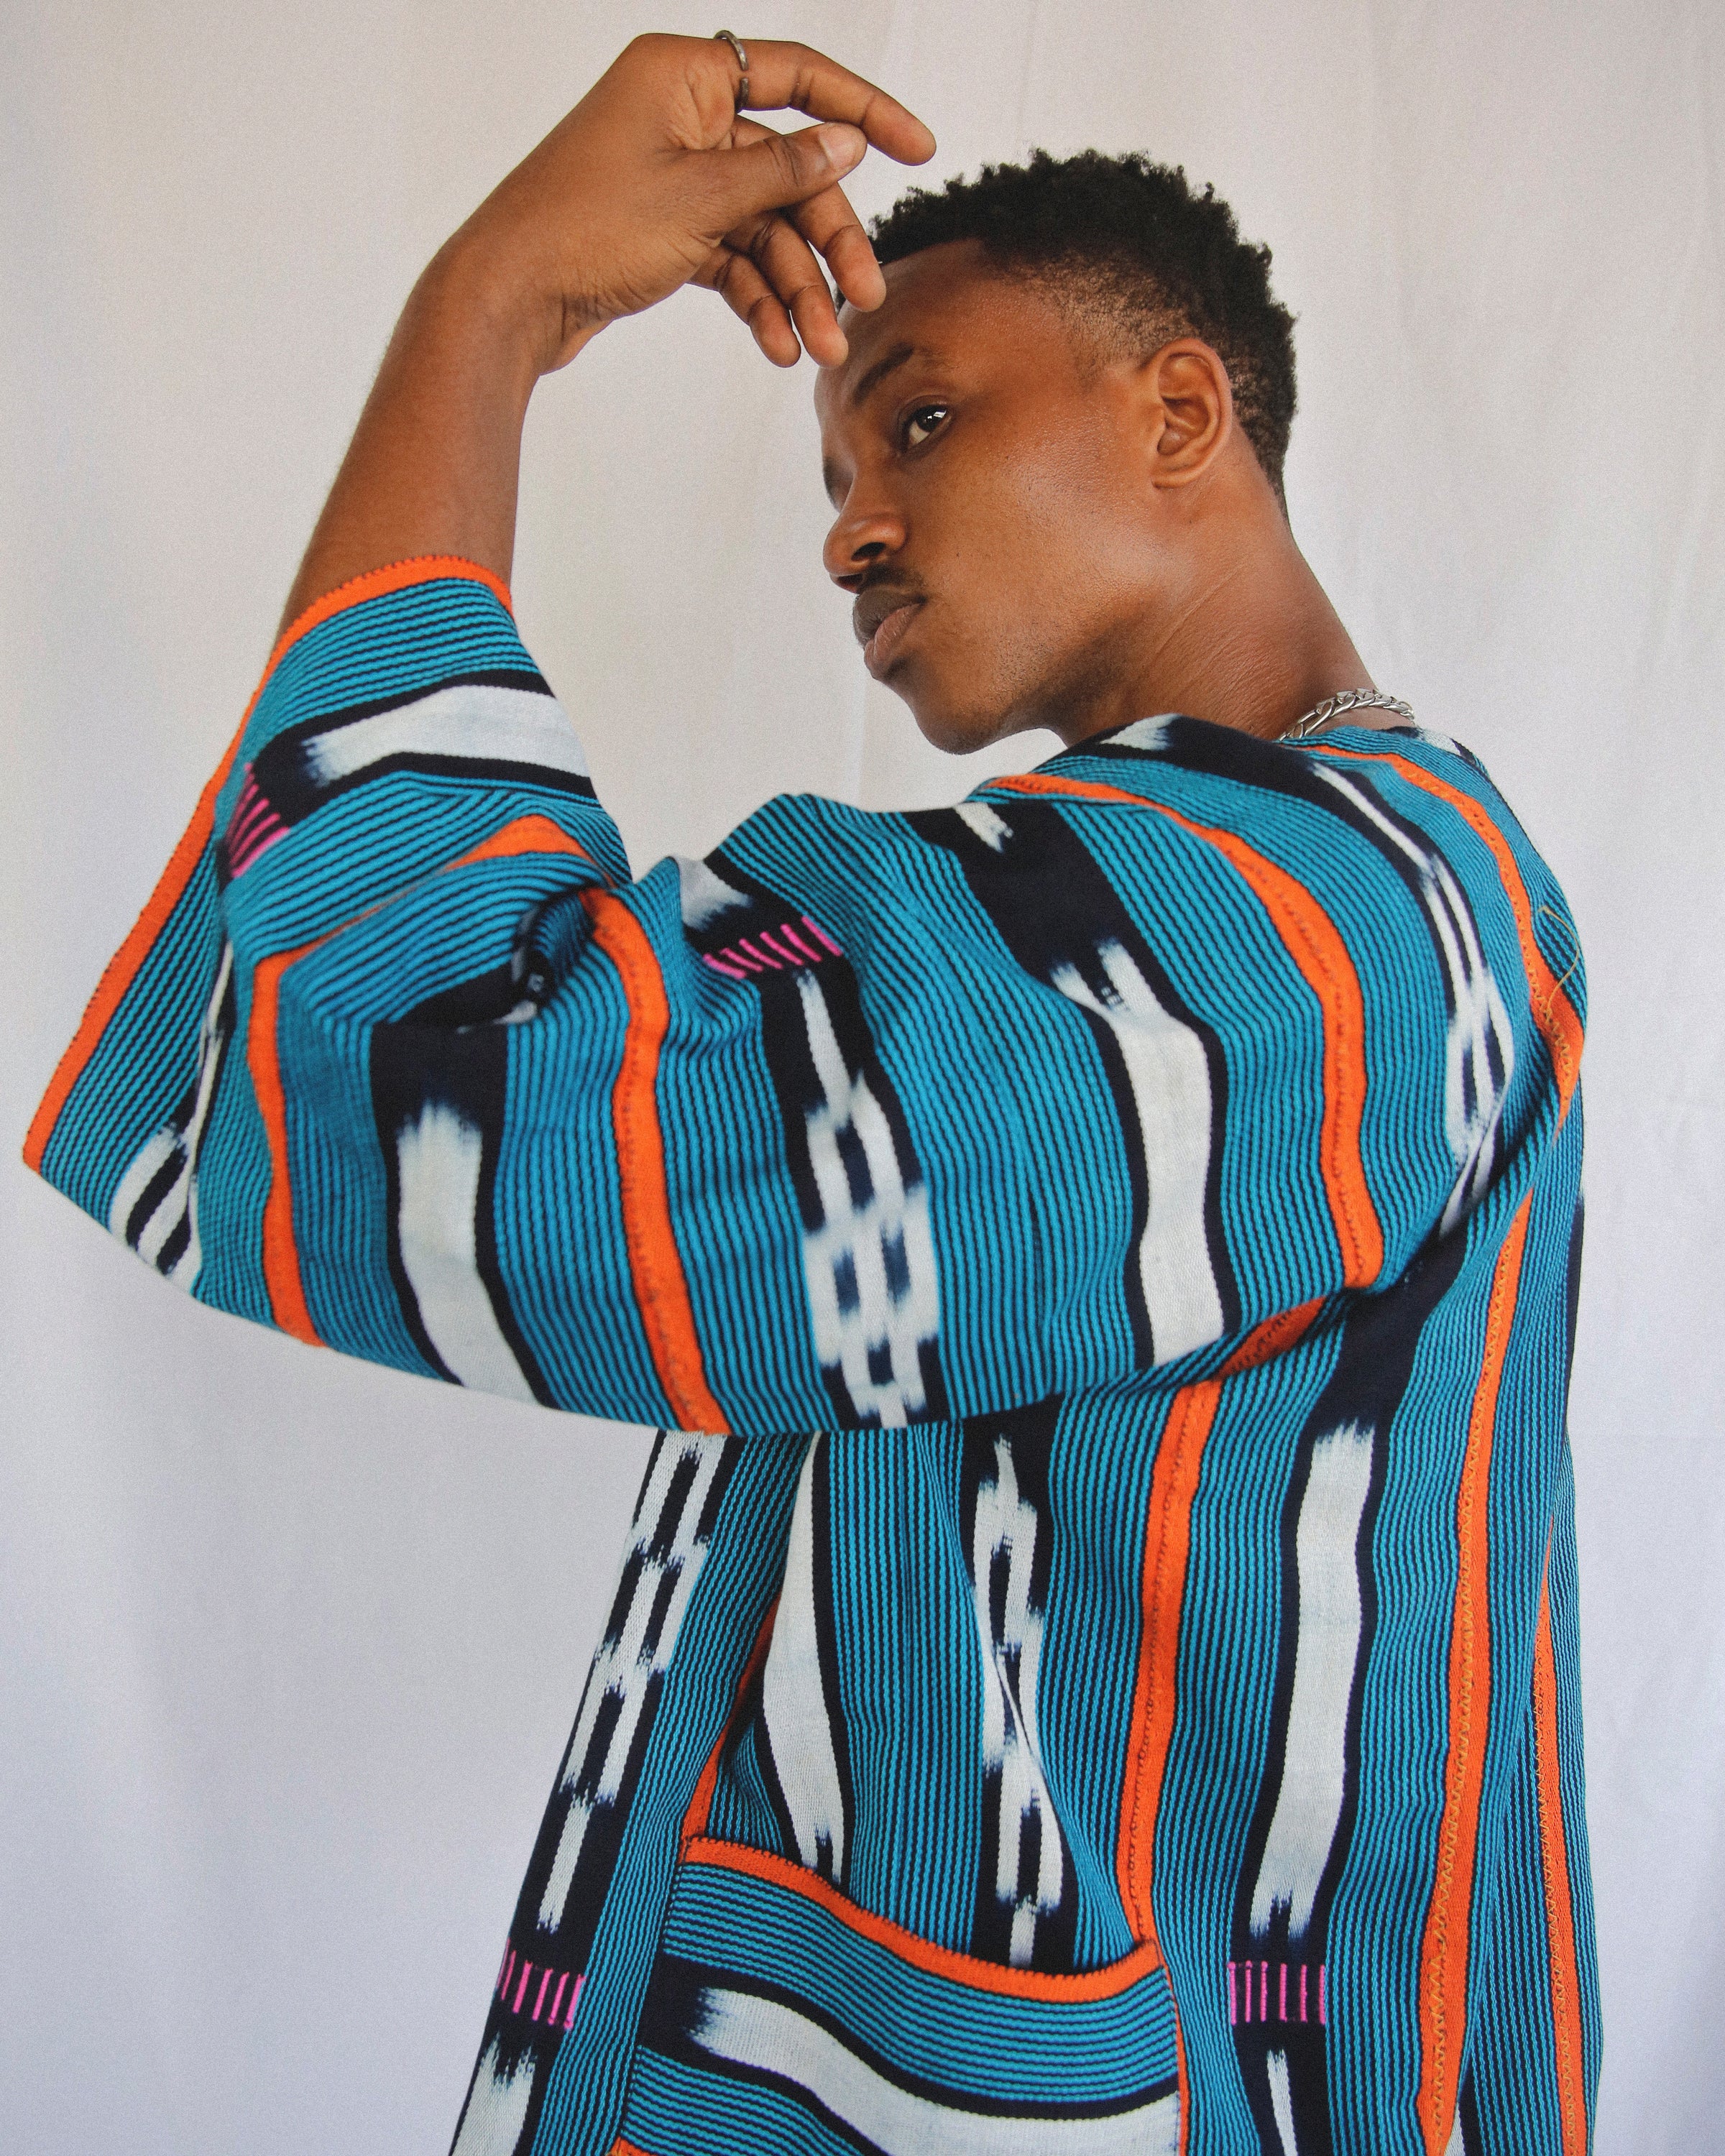 African man in aqua blue Baule textile cloak with orange, white and Navy colors with side pockets